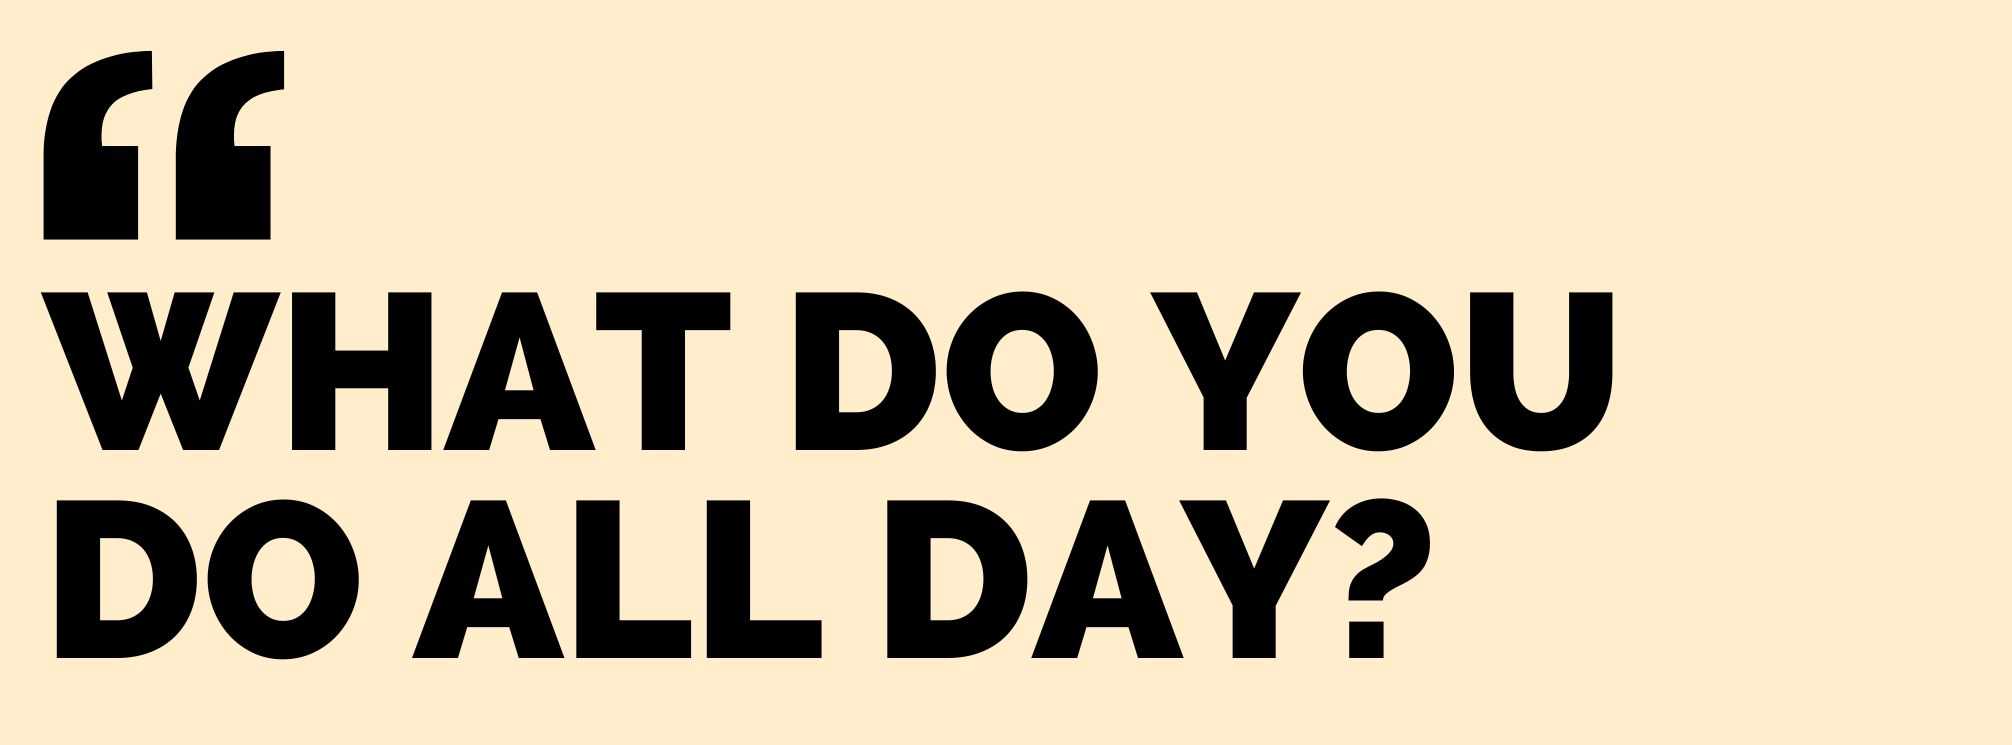 text based graphic that says "what do you do all day?"